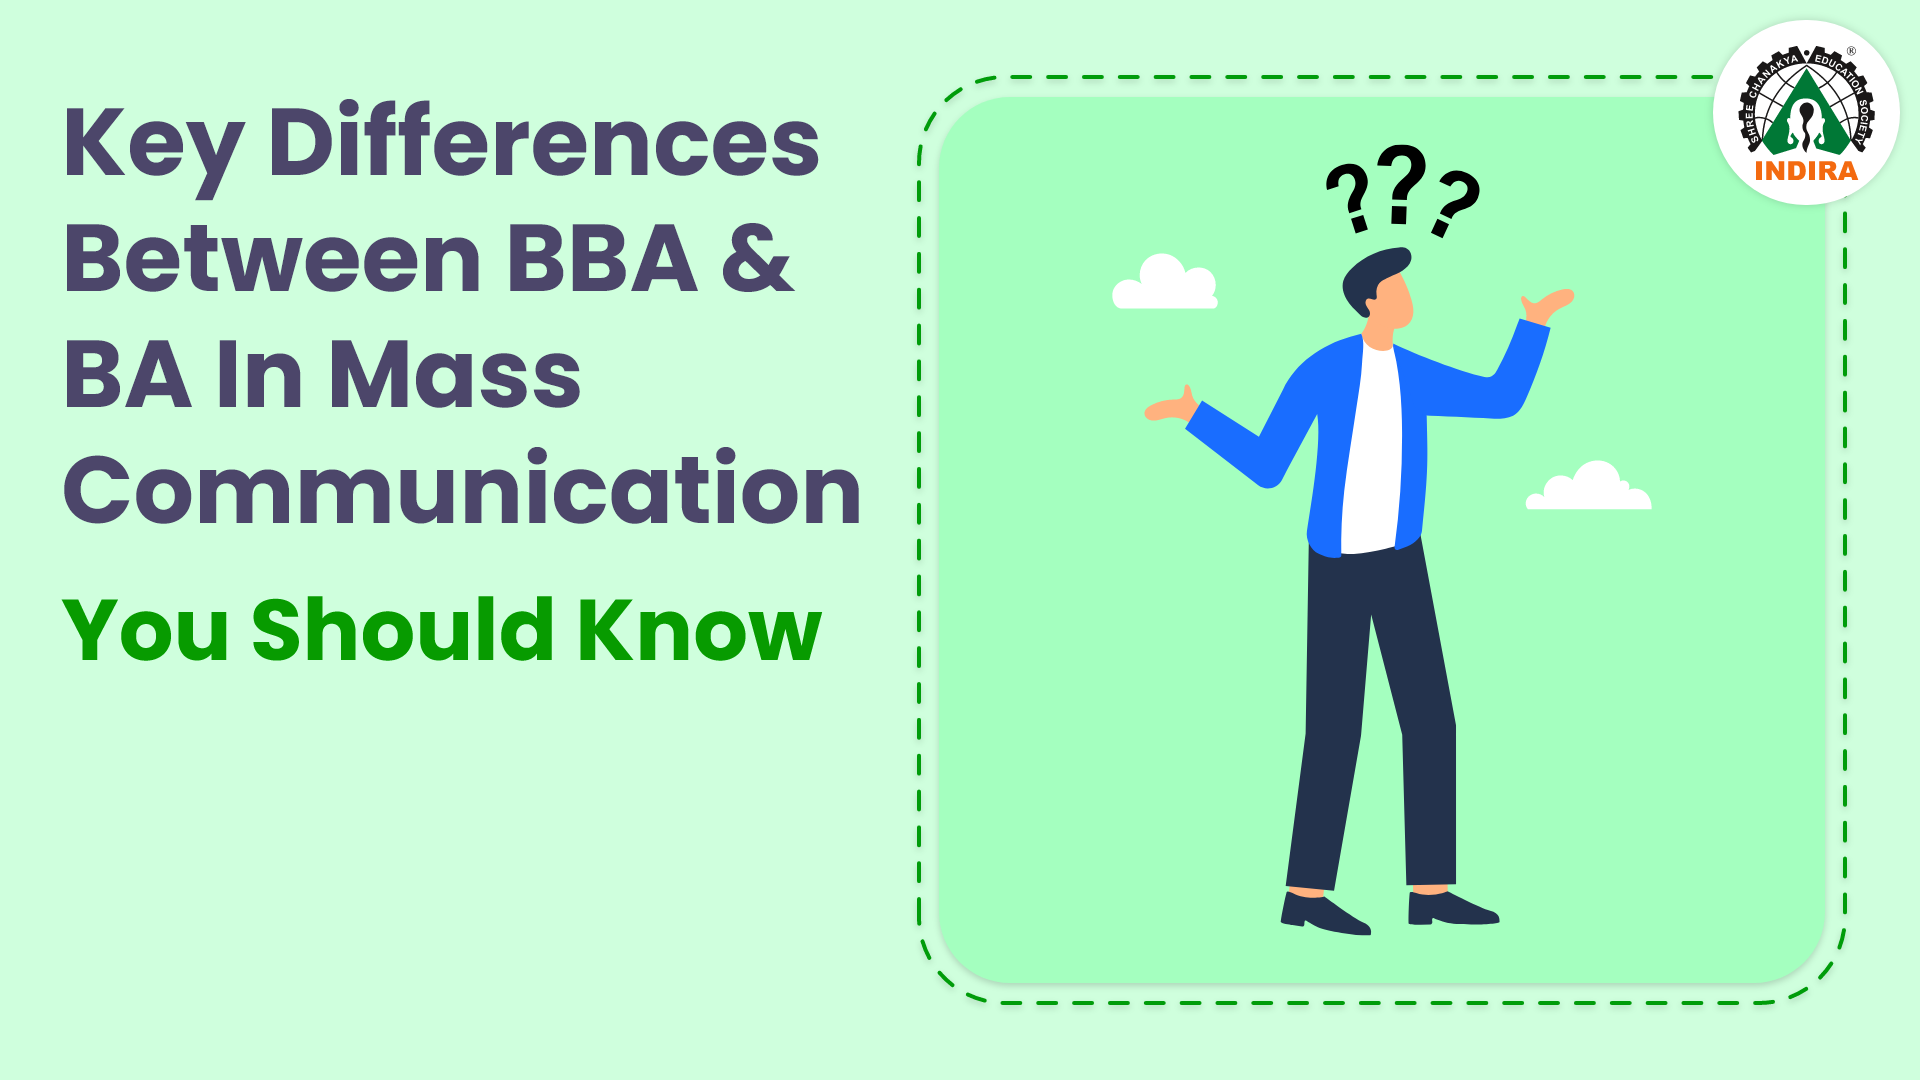 Key Differences Between BBA & BA in Mass Communication You Should Know